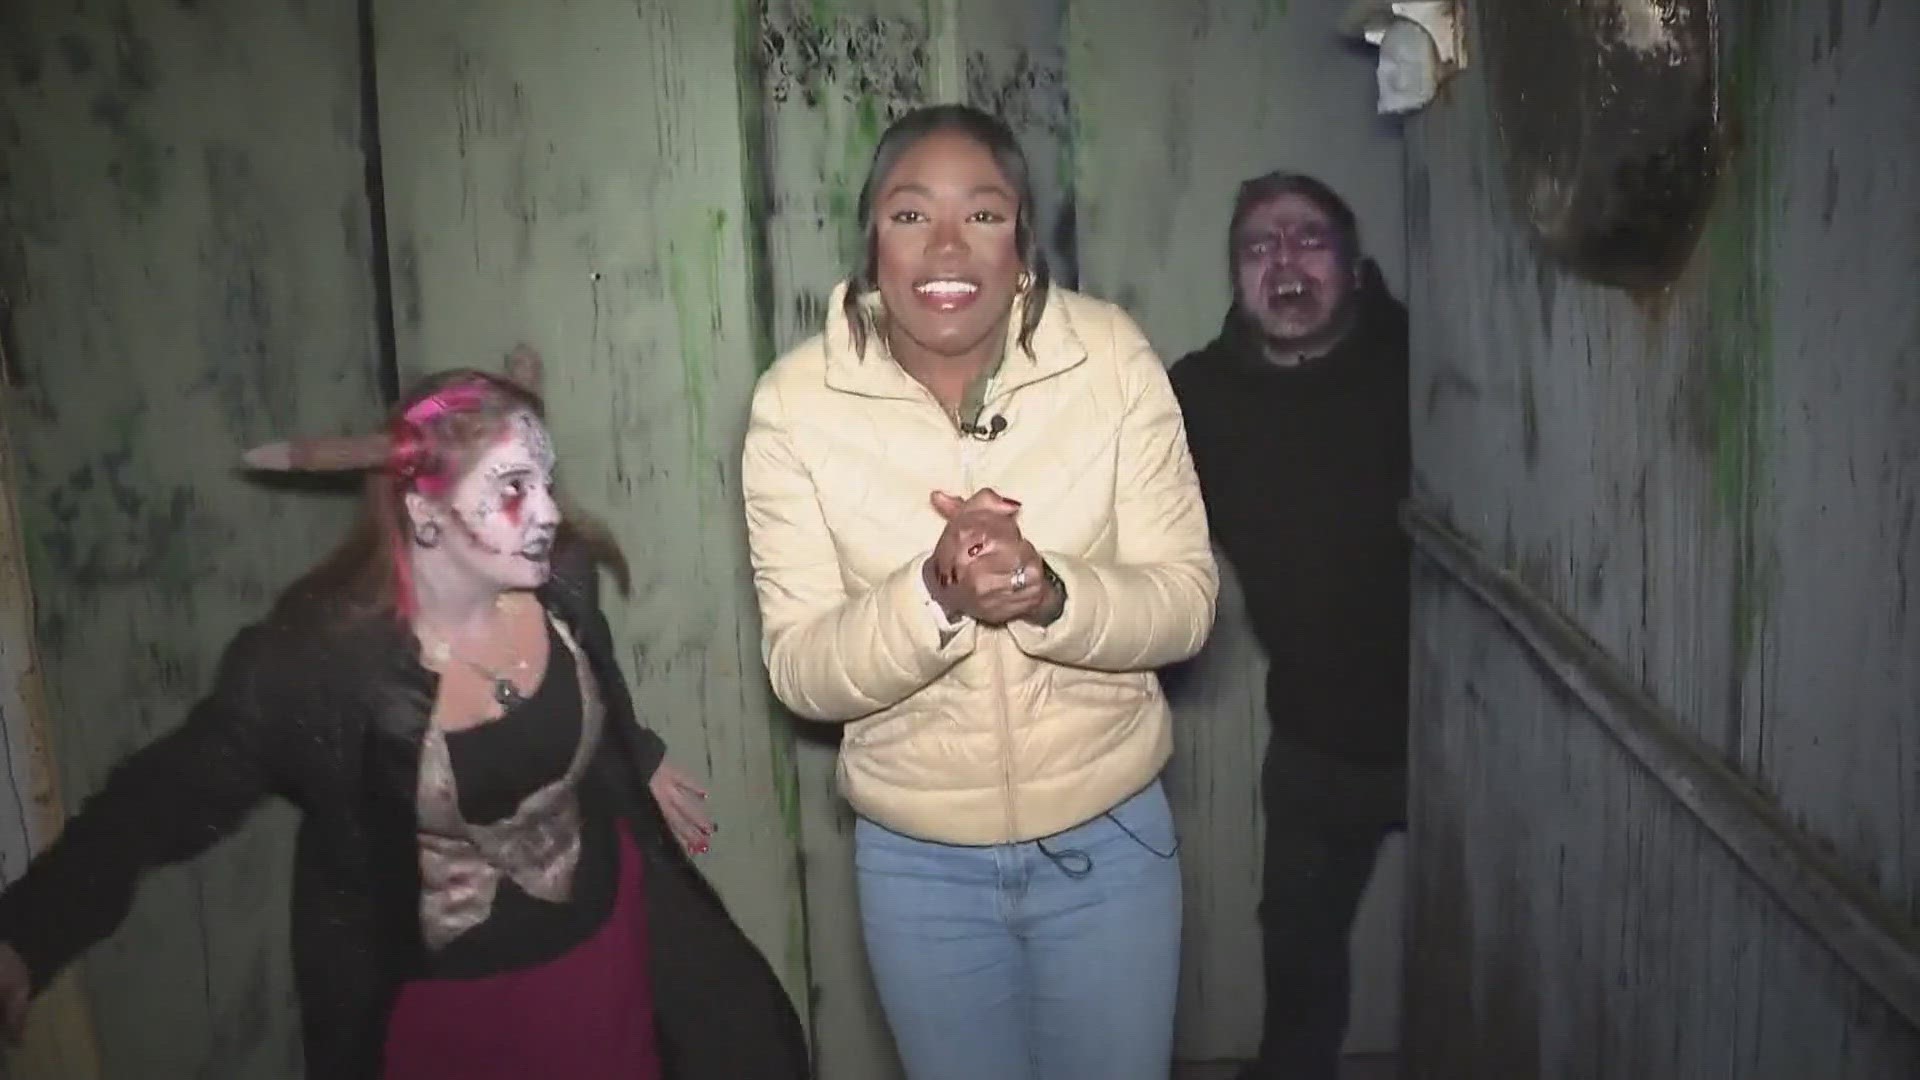 3News' Kierra Cotton got spooked while giving a behind-the-scenes look at Bloodview Haunted House.